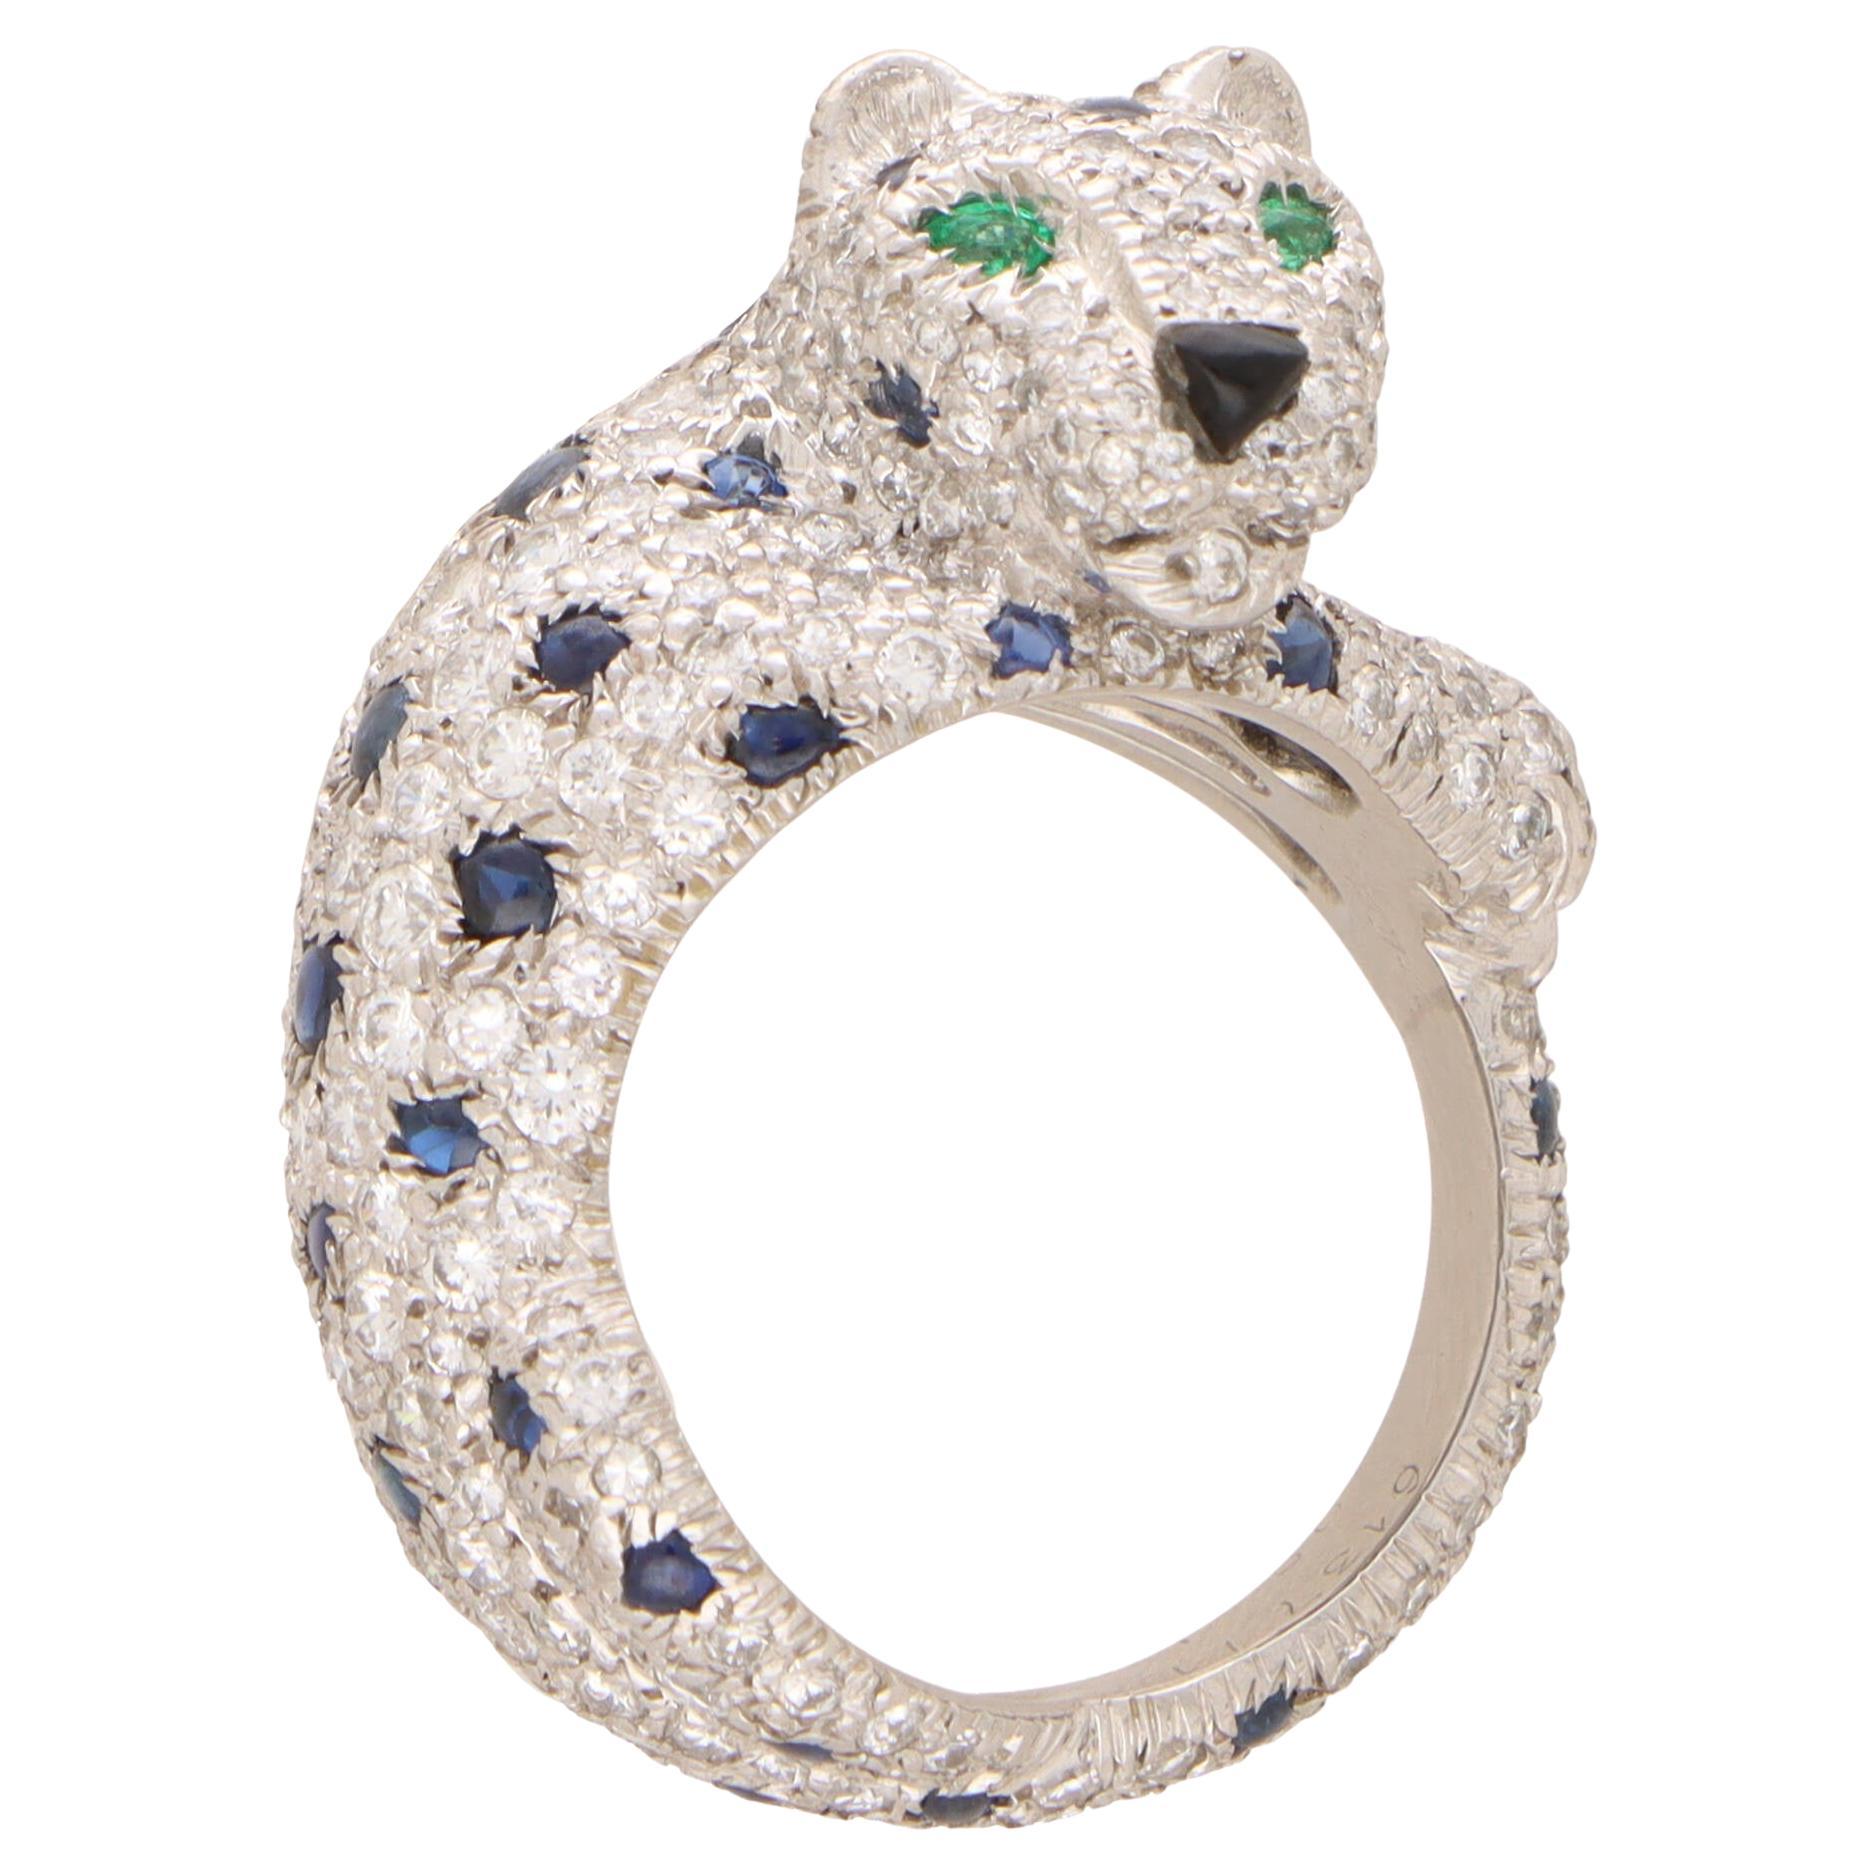 Vintage Cartier Diamond and Cabochon Sapphire Panther Ring in Platinum